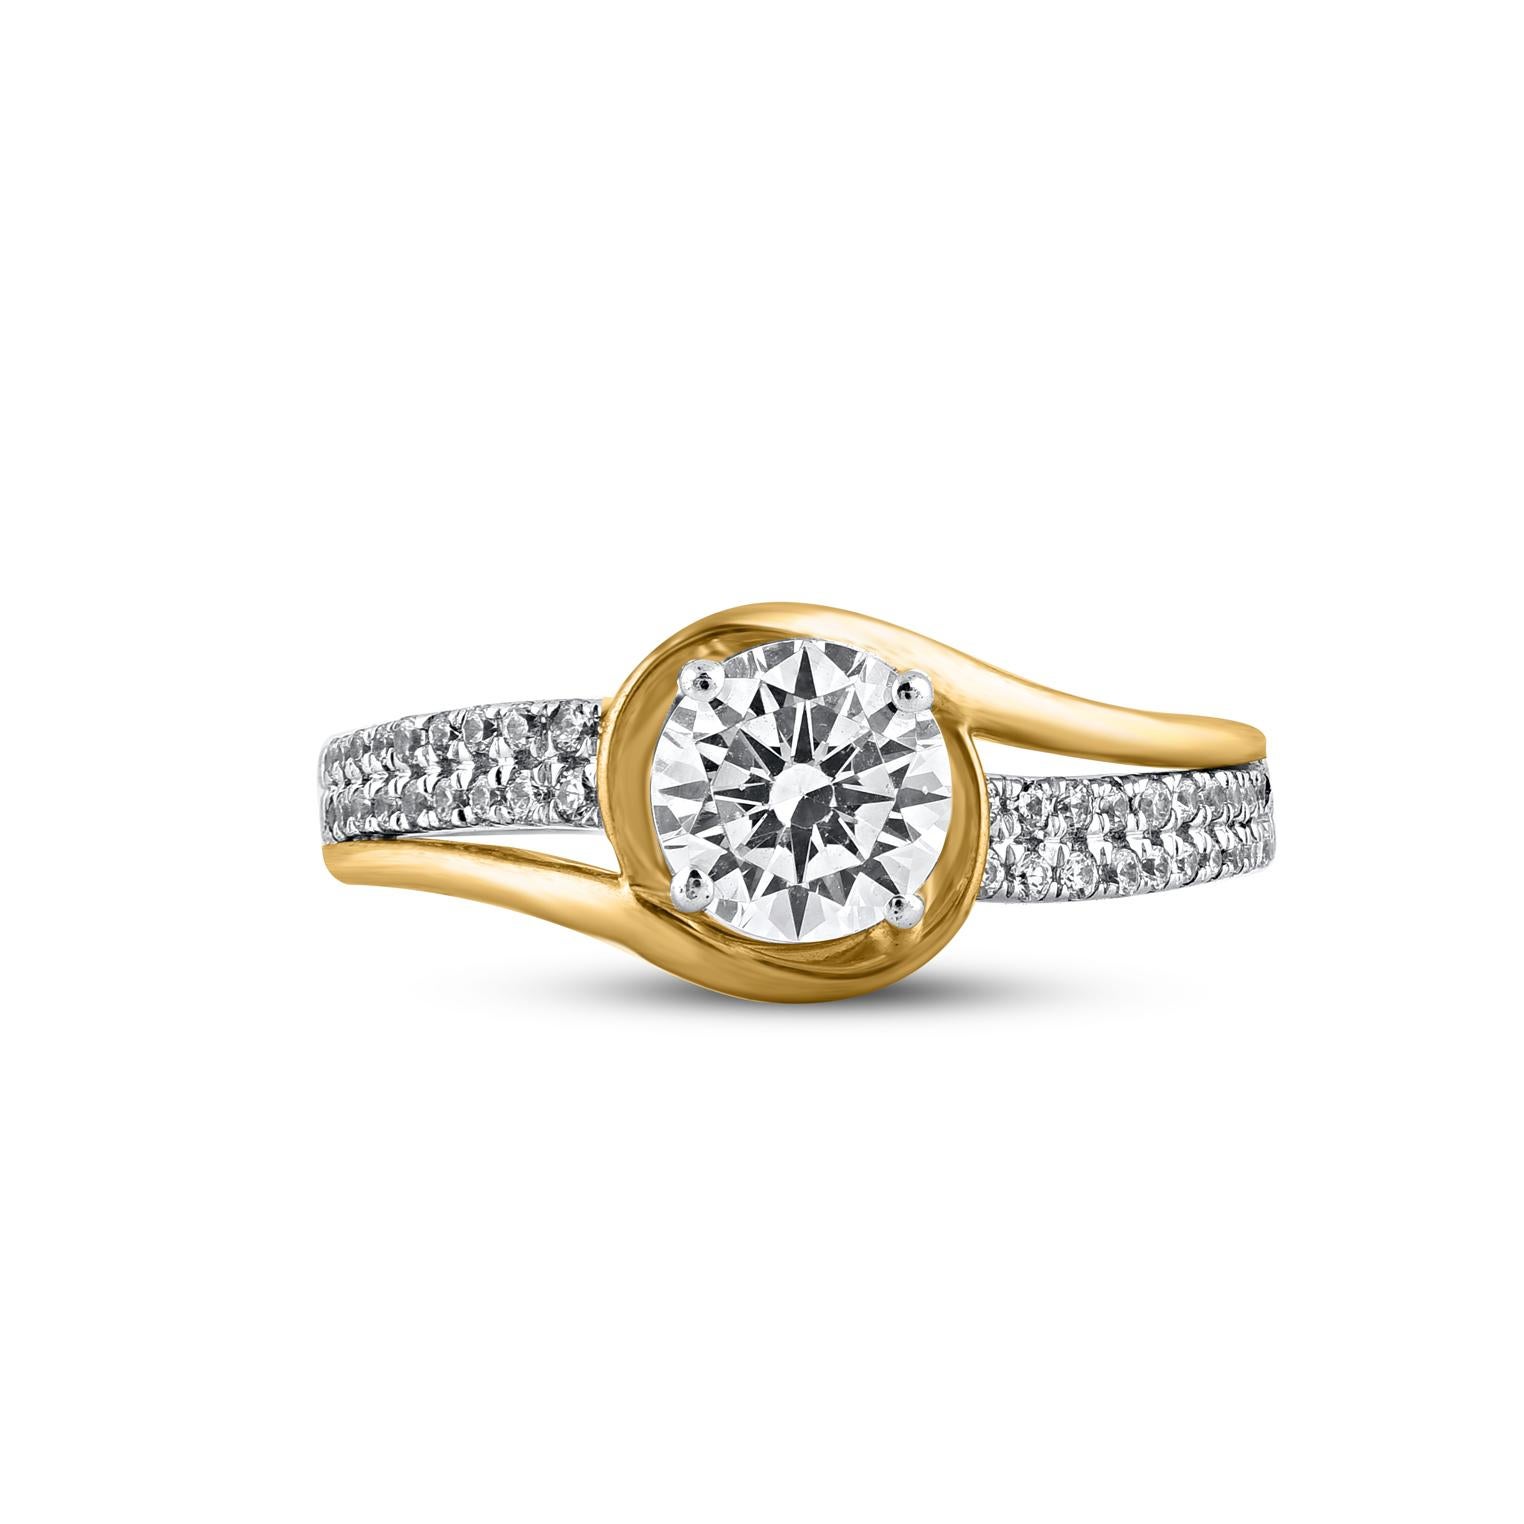 With style and shimmer, this diamond ring is perfect for any occasion. Beautifully crafted by our inhouse experts in 14 karat two tone gold and embellished with 45 brilliant cut and single cut round diamonds set in prong and pave setting. Total